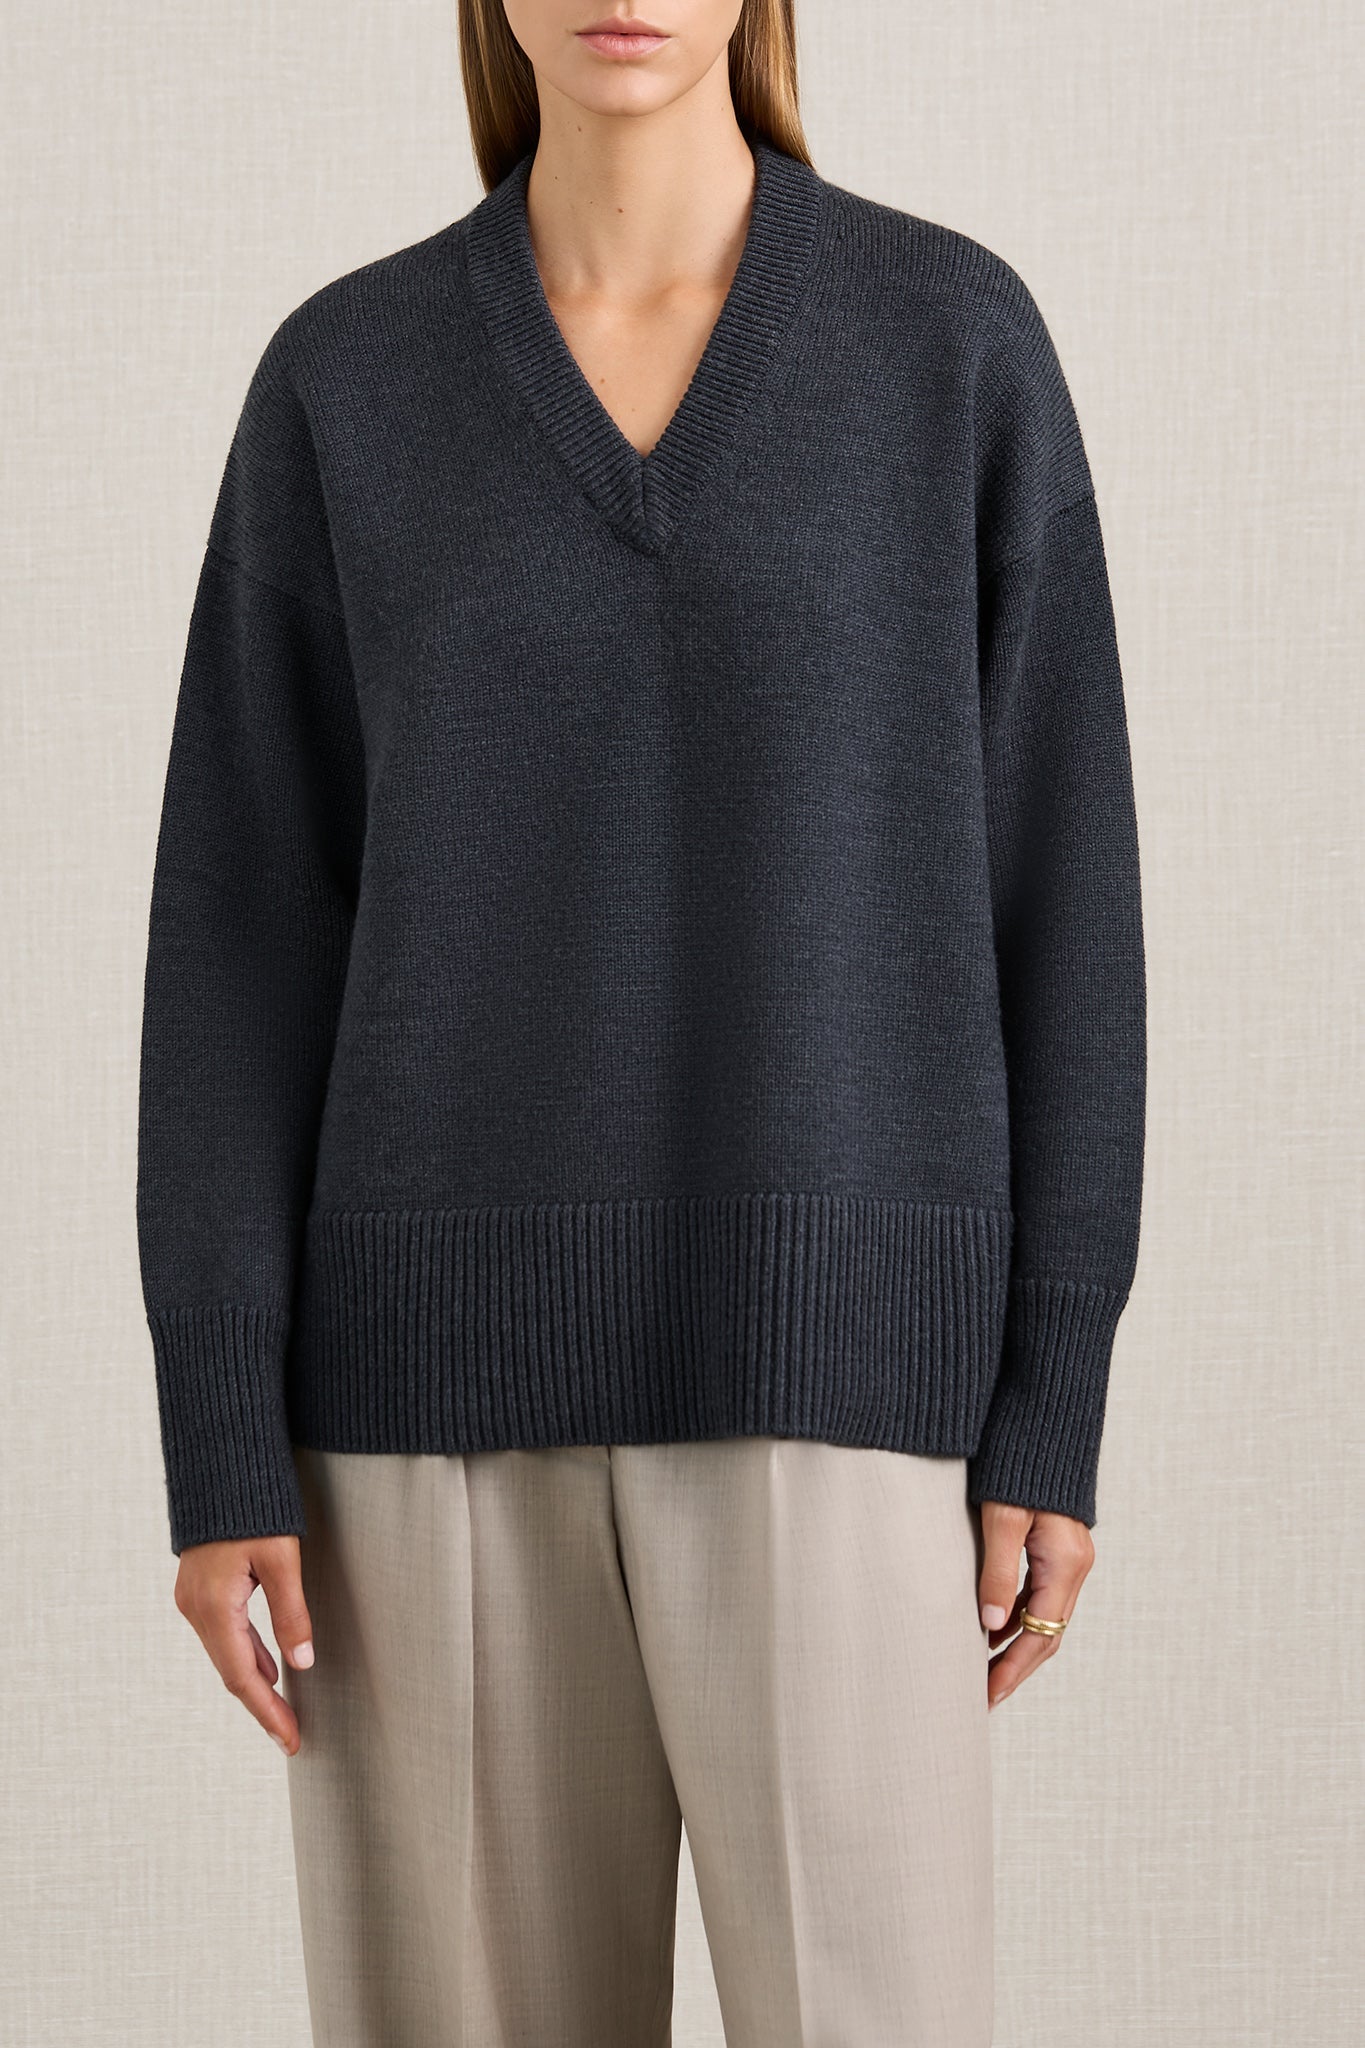 A.Emery | The Lewis Knit - Charcoal Melange